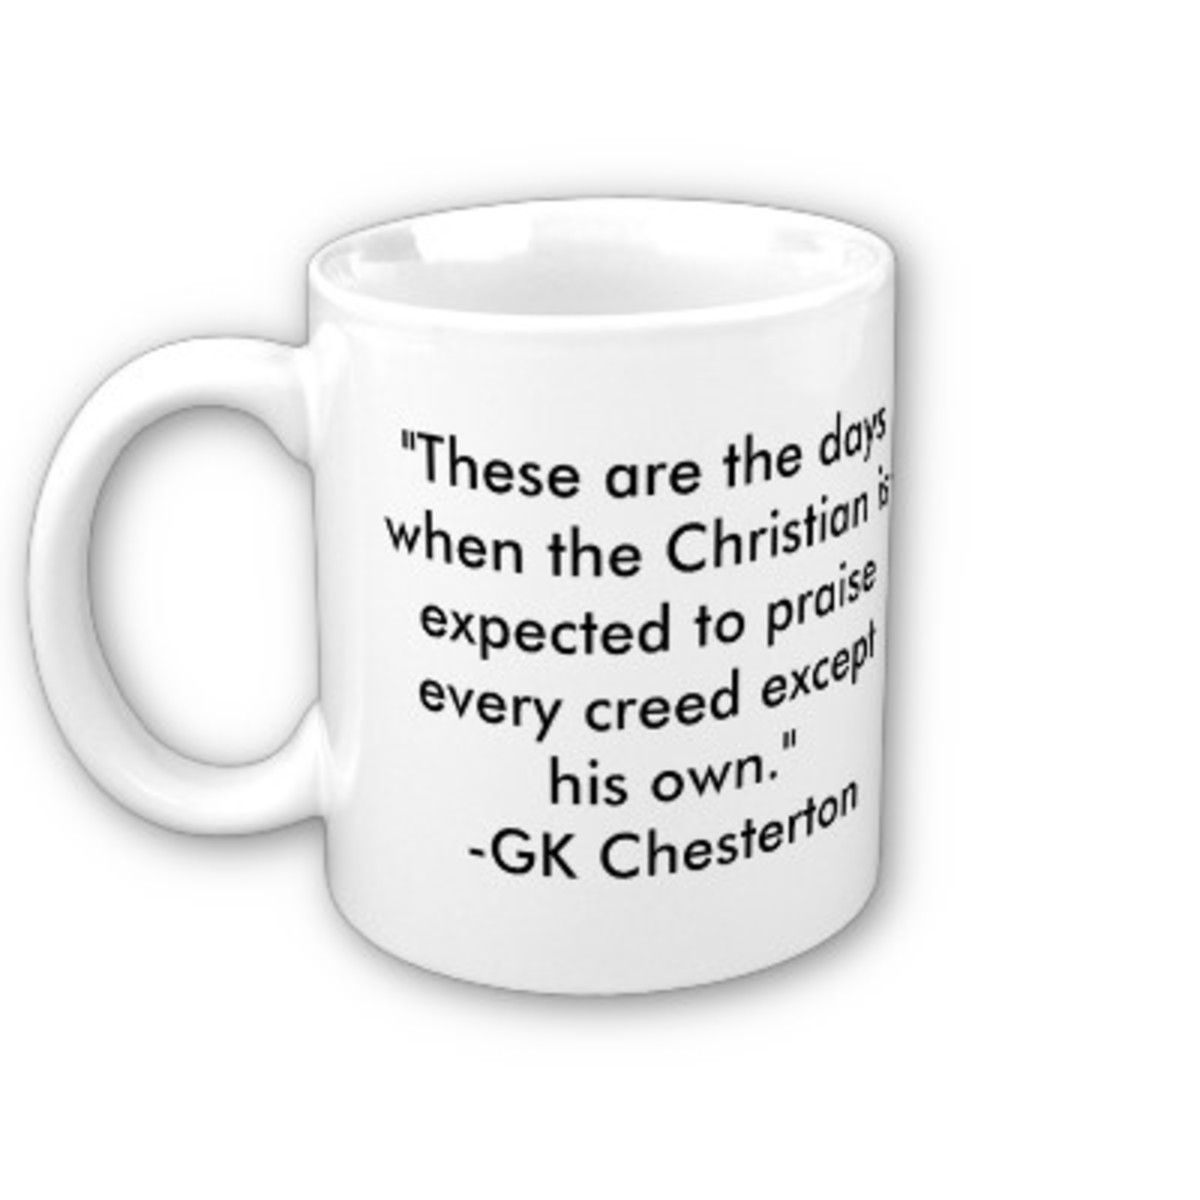 Quote from G K Chesterton